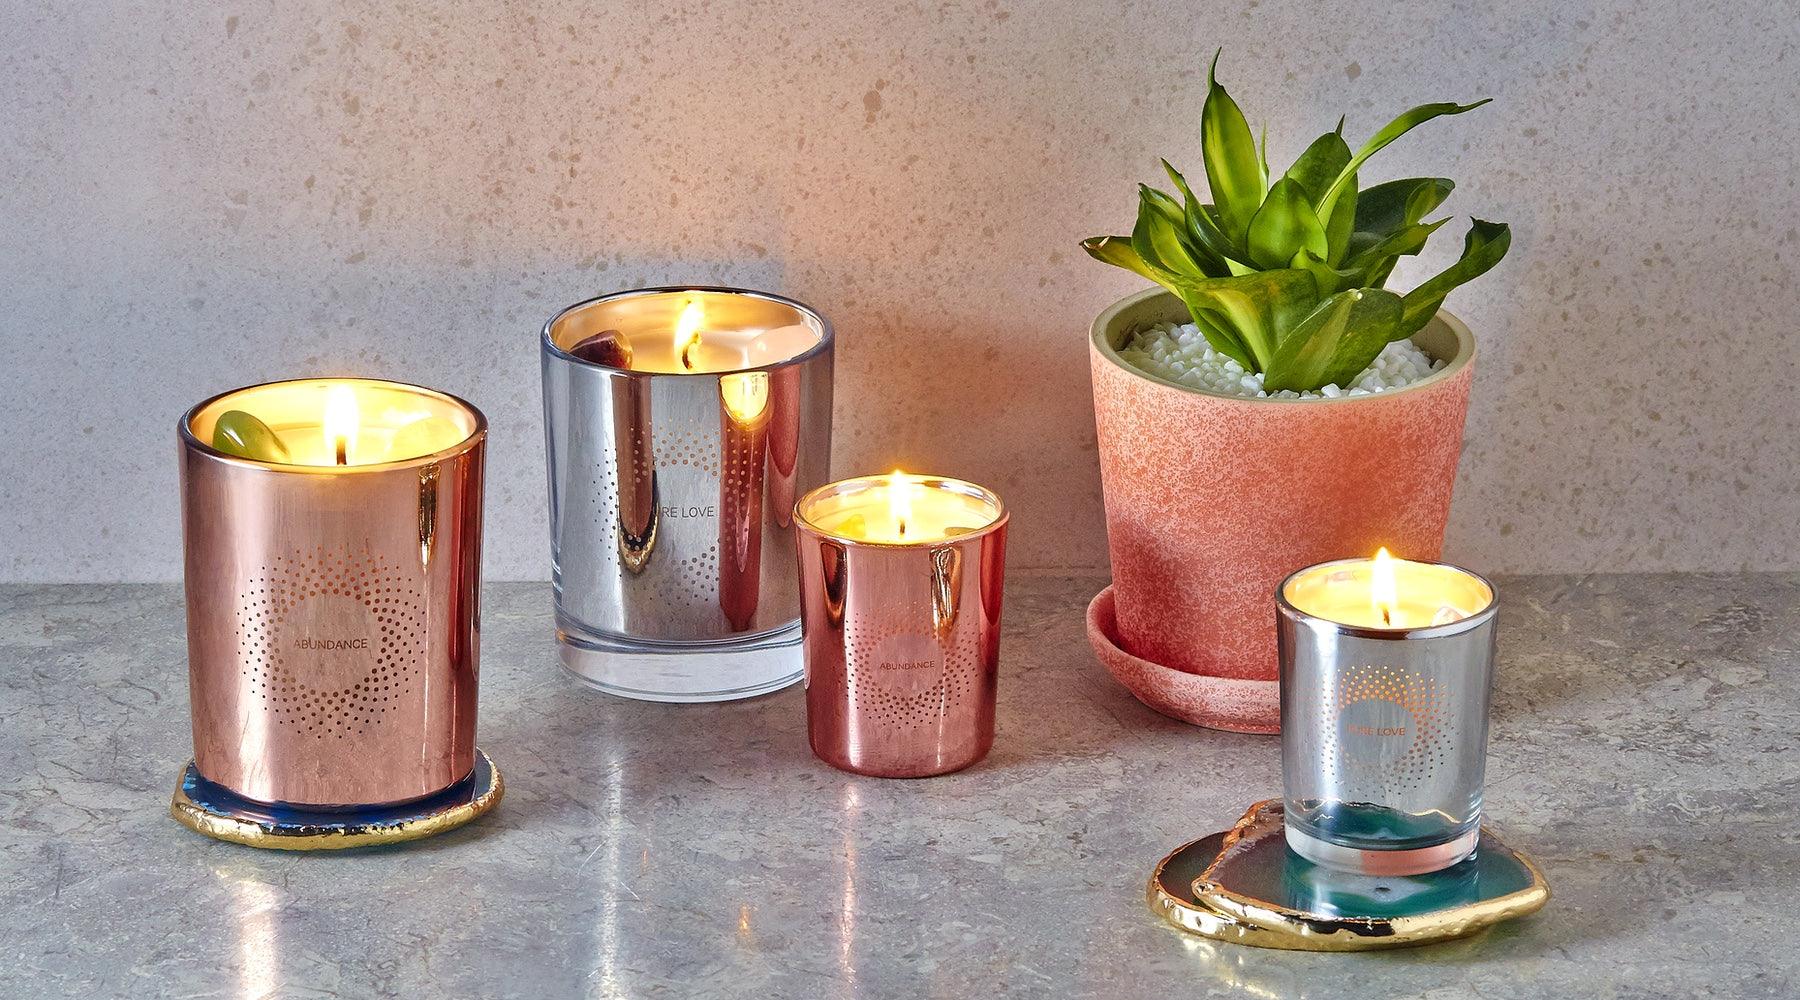 Threerituals Home Fragrance including Scented Candles